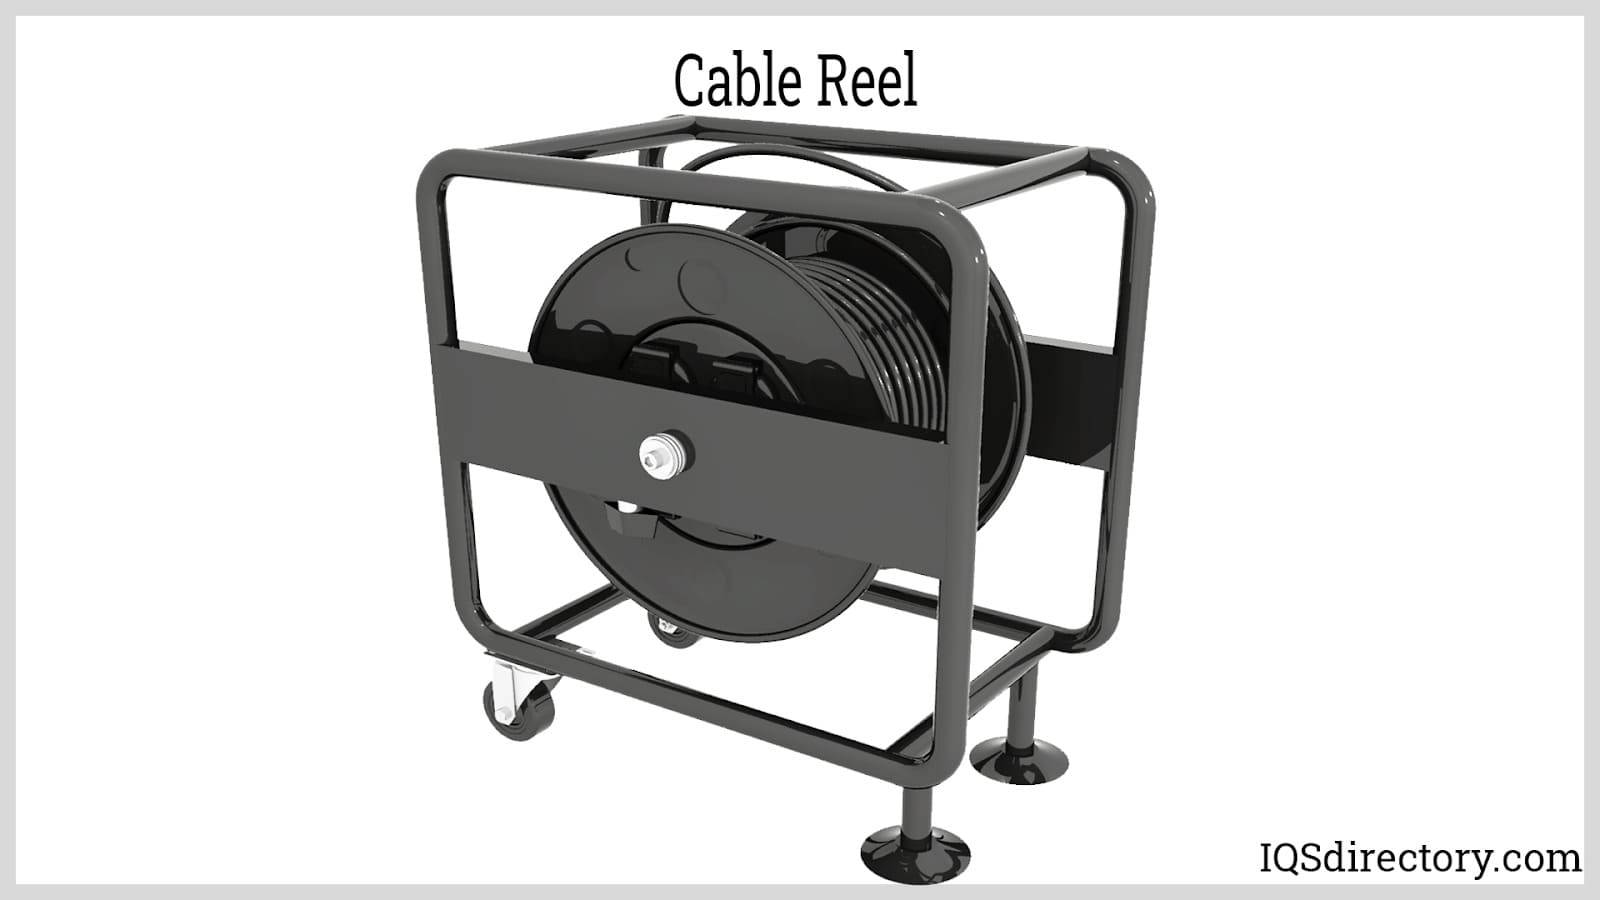 Wiring tips for electric reels and other components. 